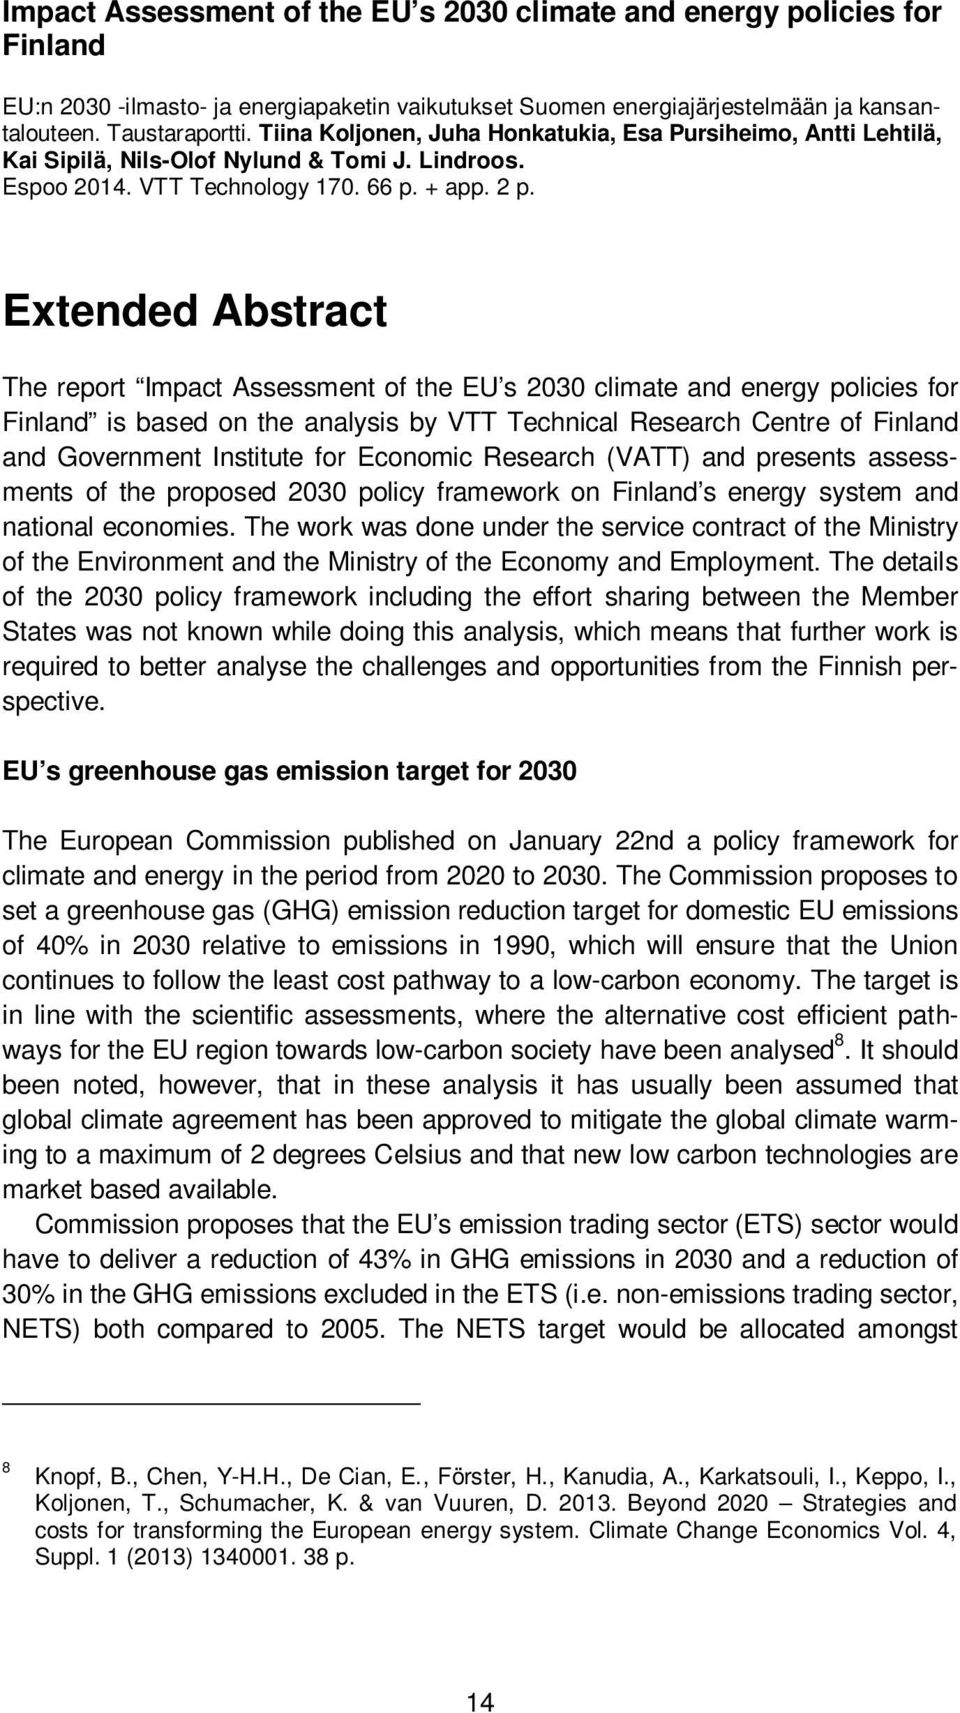 Extended Abstract The report Impact Assessment of the EU s 2030 climate and energy policies for Finland is based on the analysis by VTT Technical Research Centre of Finland and Government Institute